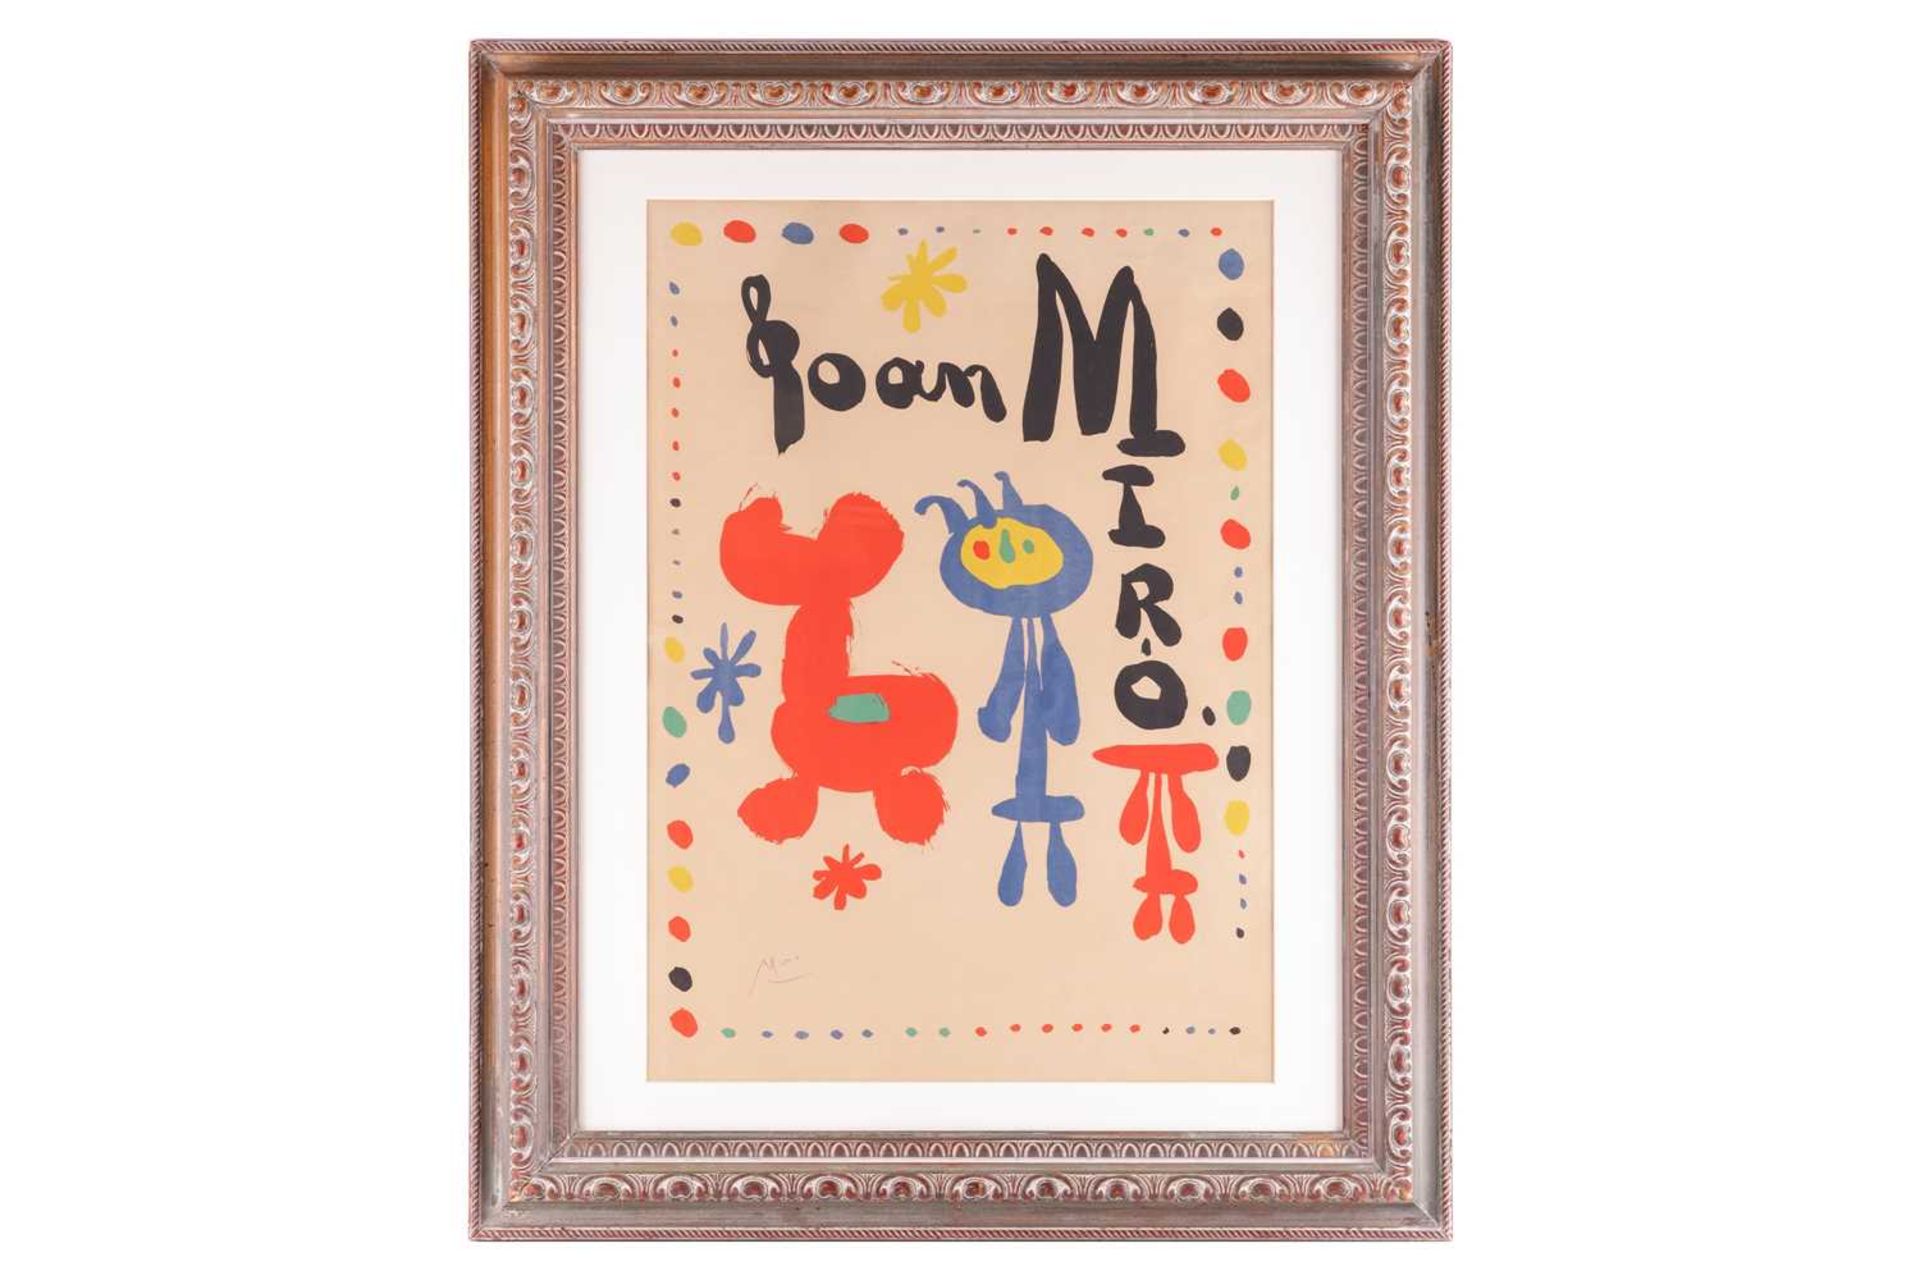 Joan Miro (Spanish, 1893 - 1983), Poster for Exhibition of 1948, signed in pencil (lower left),